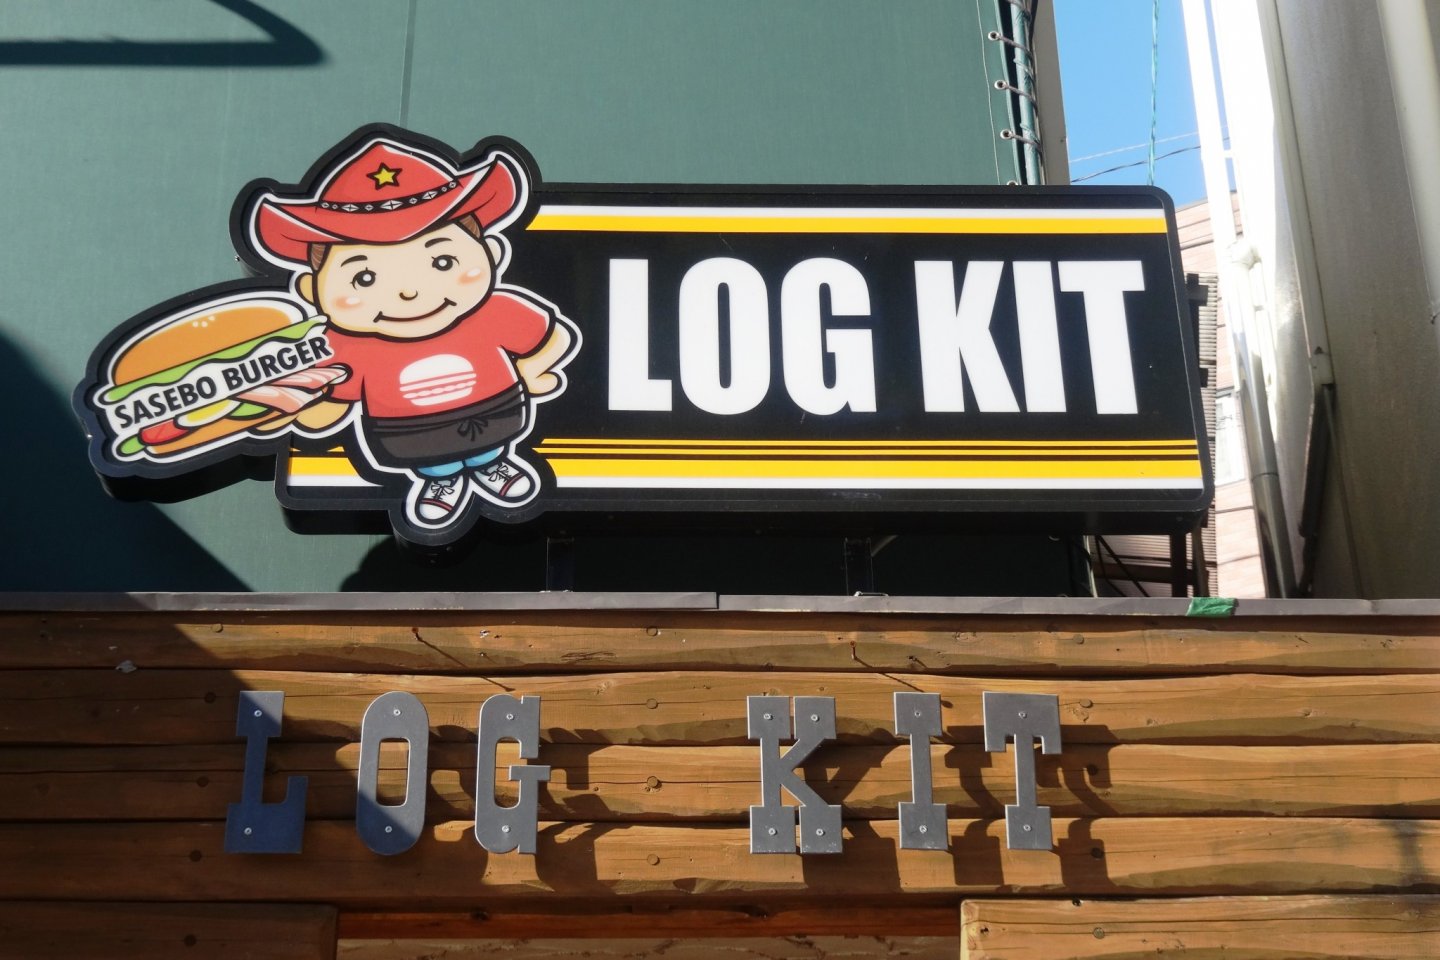 Log Kit's sign is easy to see as soon as you come off of the expressway